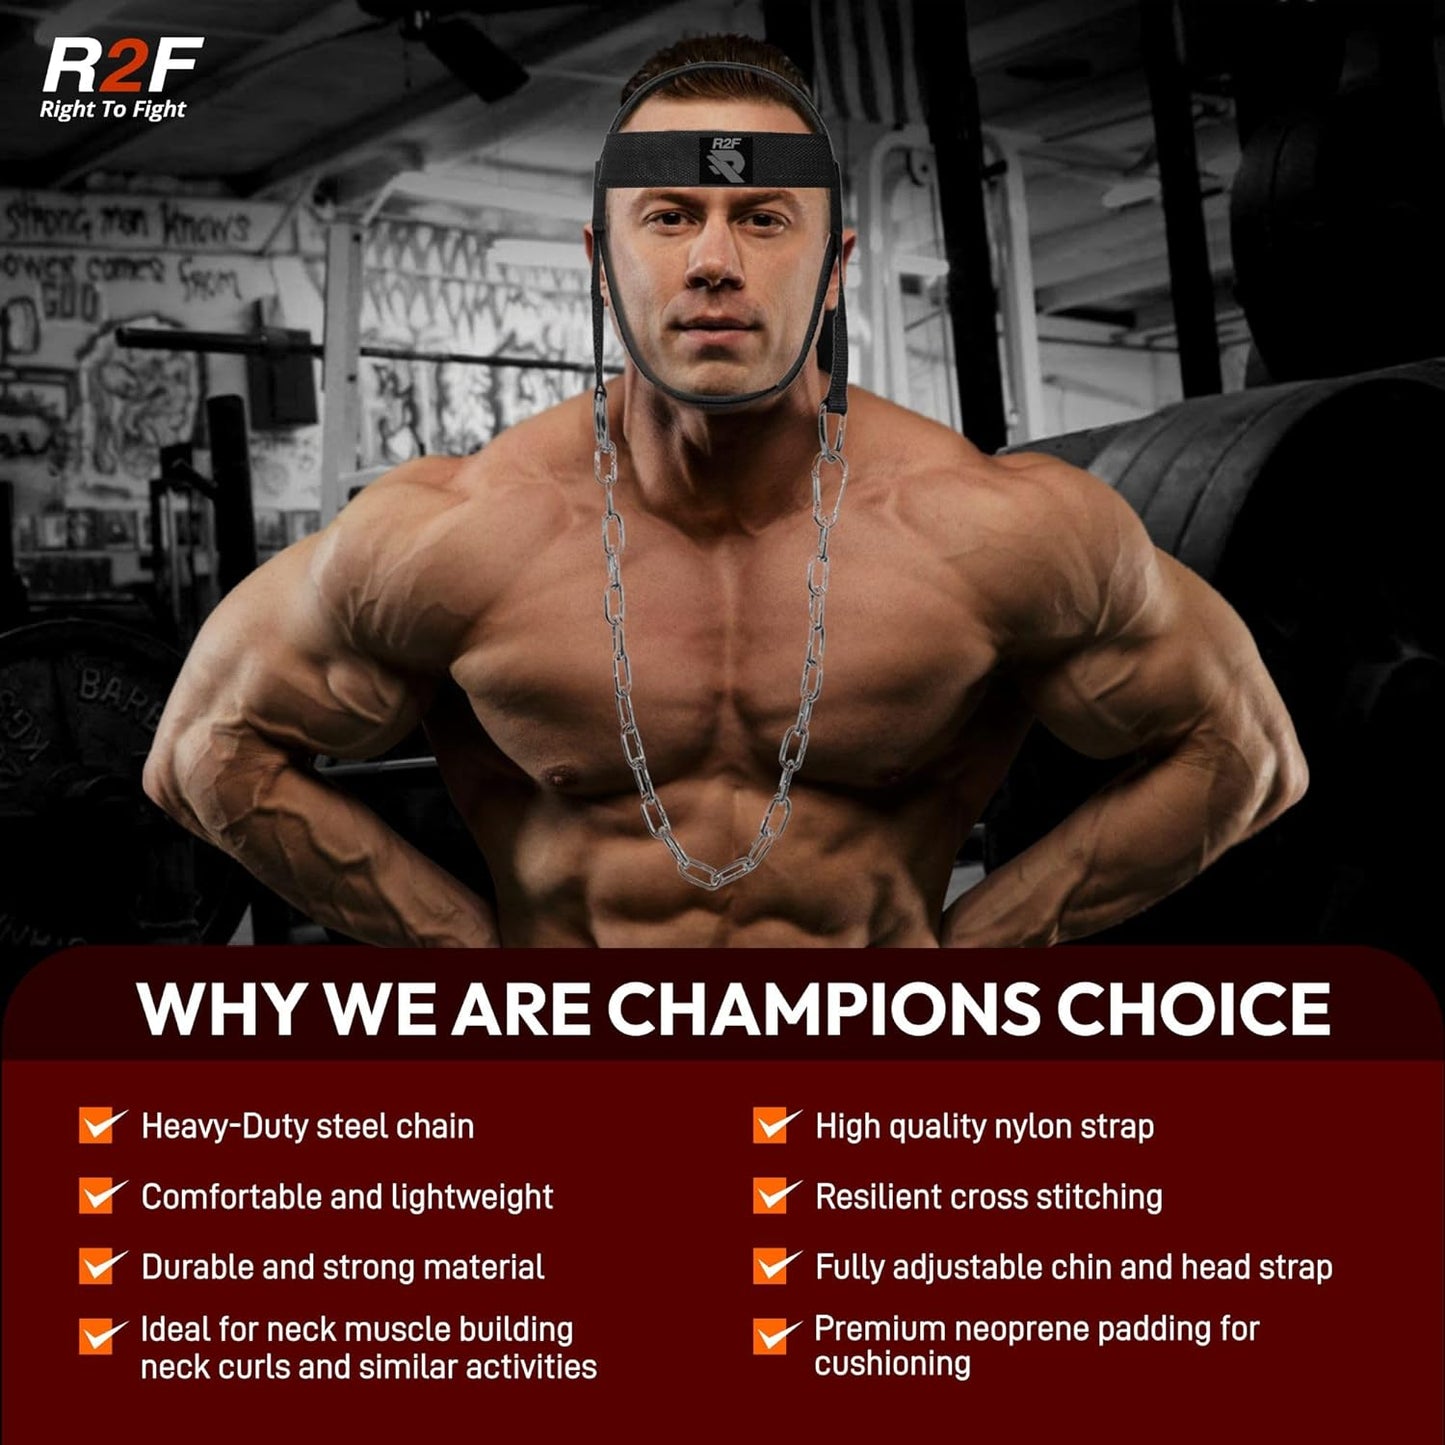 Enhance your neck strength with R2F Sports' neck harness weight lifting training. Our specialized equipment and training techniques are designed to help you build a strong and resilient neck. Improve your overall athletic performance and reduce the risk of injury with our effective neck training program.